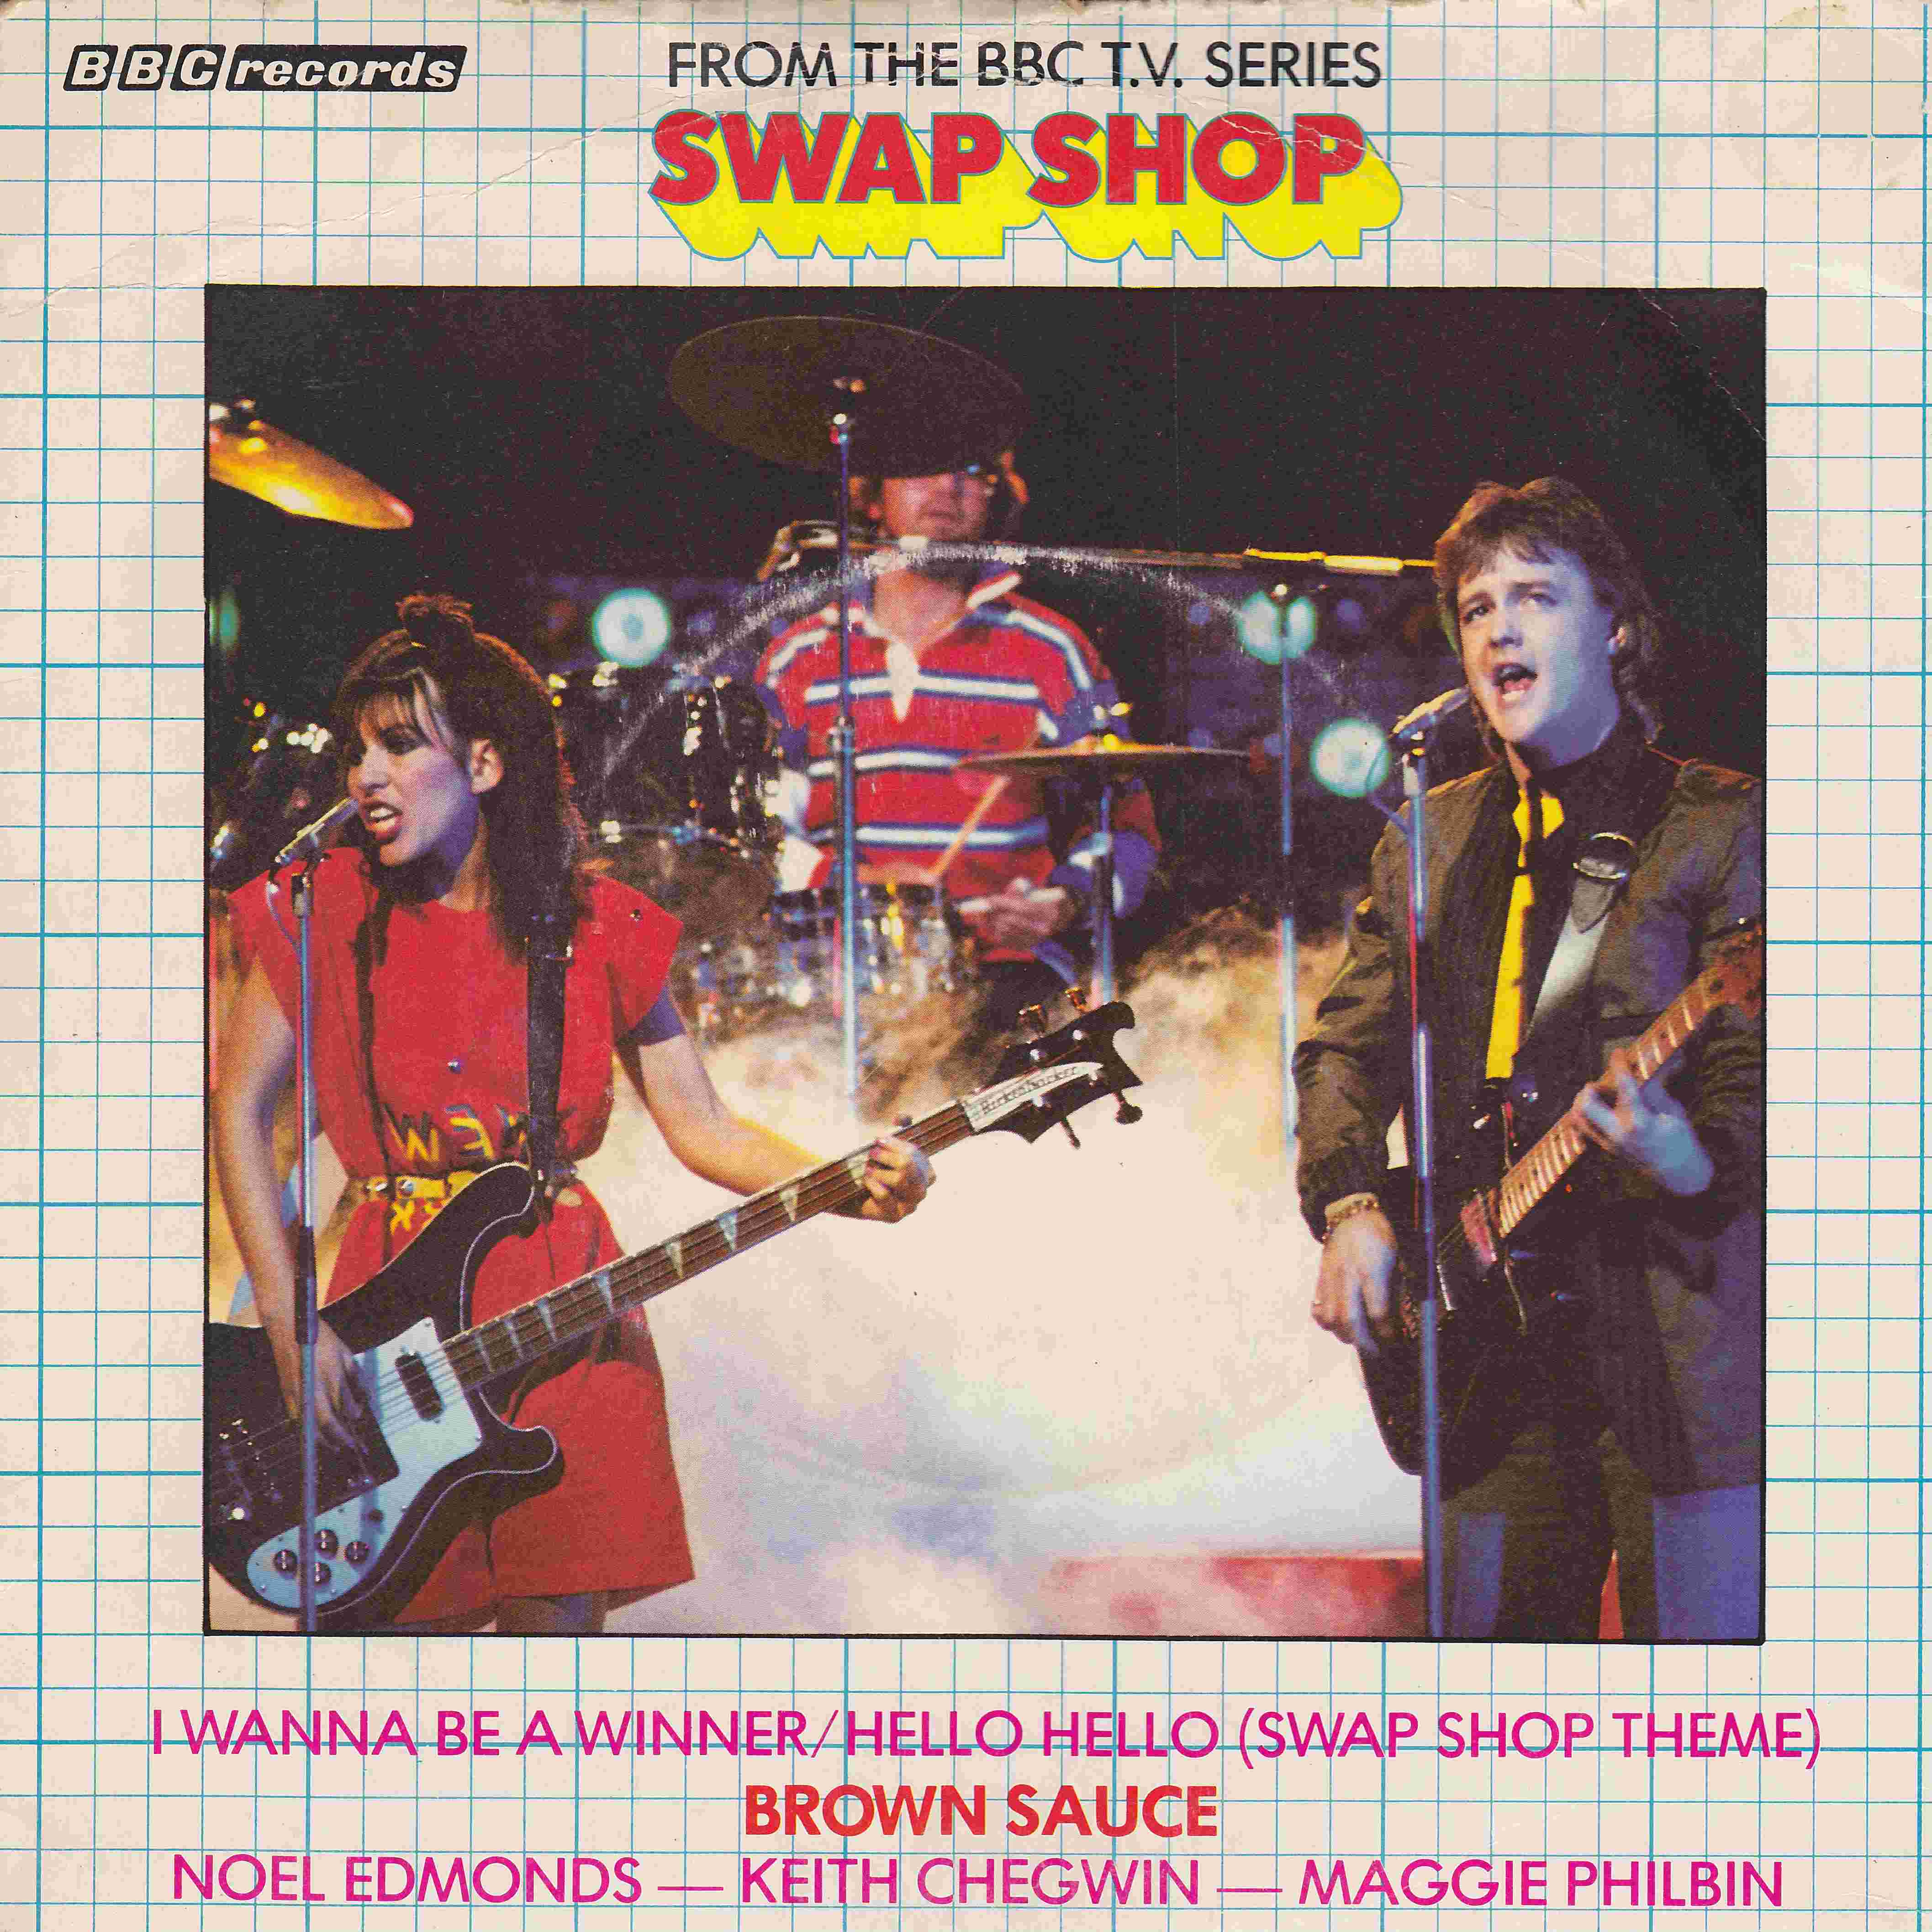 Picture of RESL 101 I wanna be a winner (Swap shop) by artist B. A. Robertson from the BBC records and Tapes library